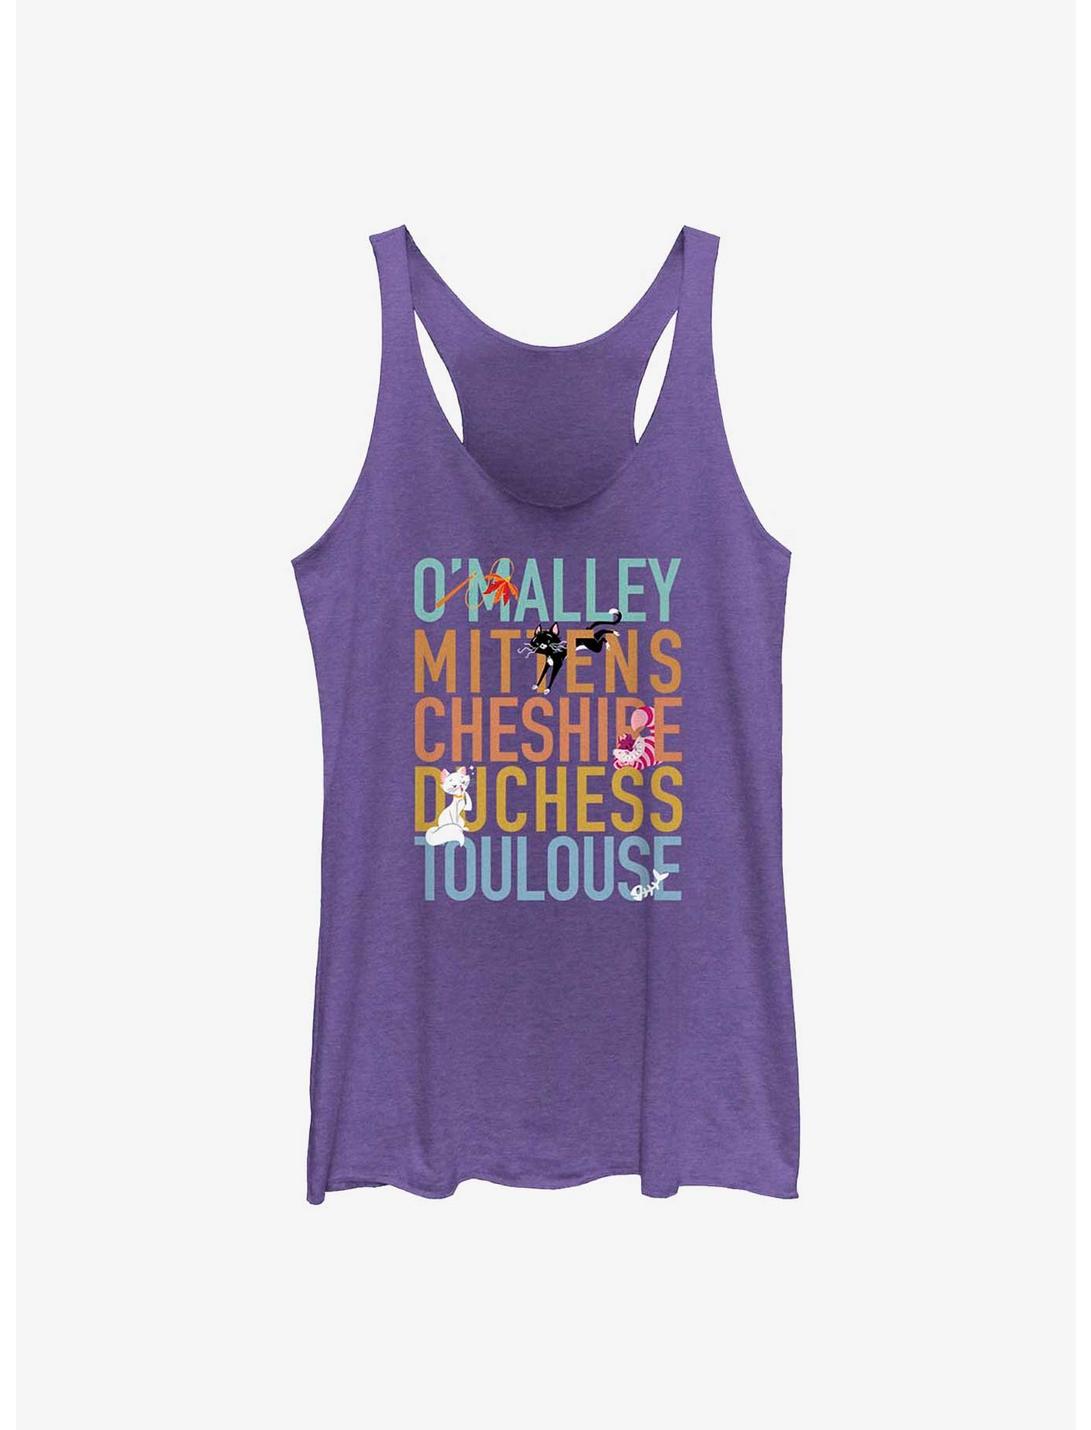 Disney Channel O'Malley, Mittens, Cheshire, Duchess, Toulouse Girls Tank, PUR HTR, hi-res